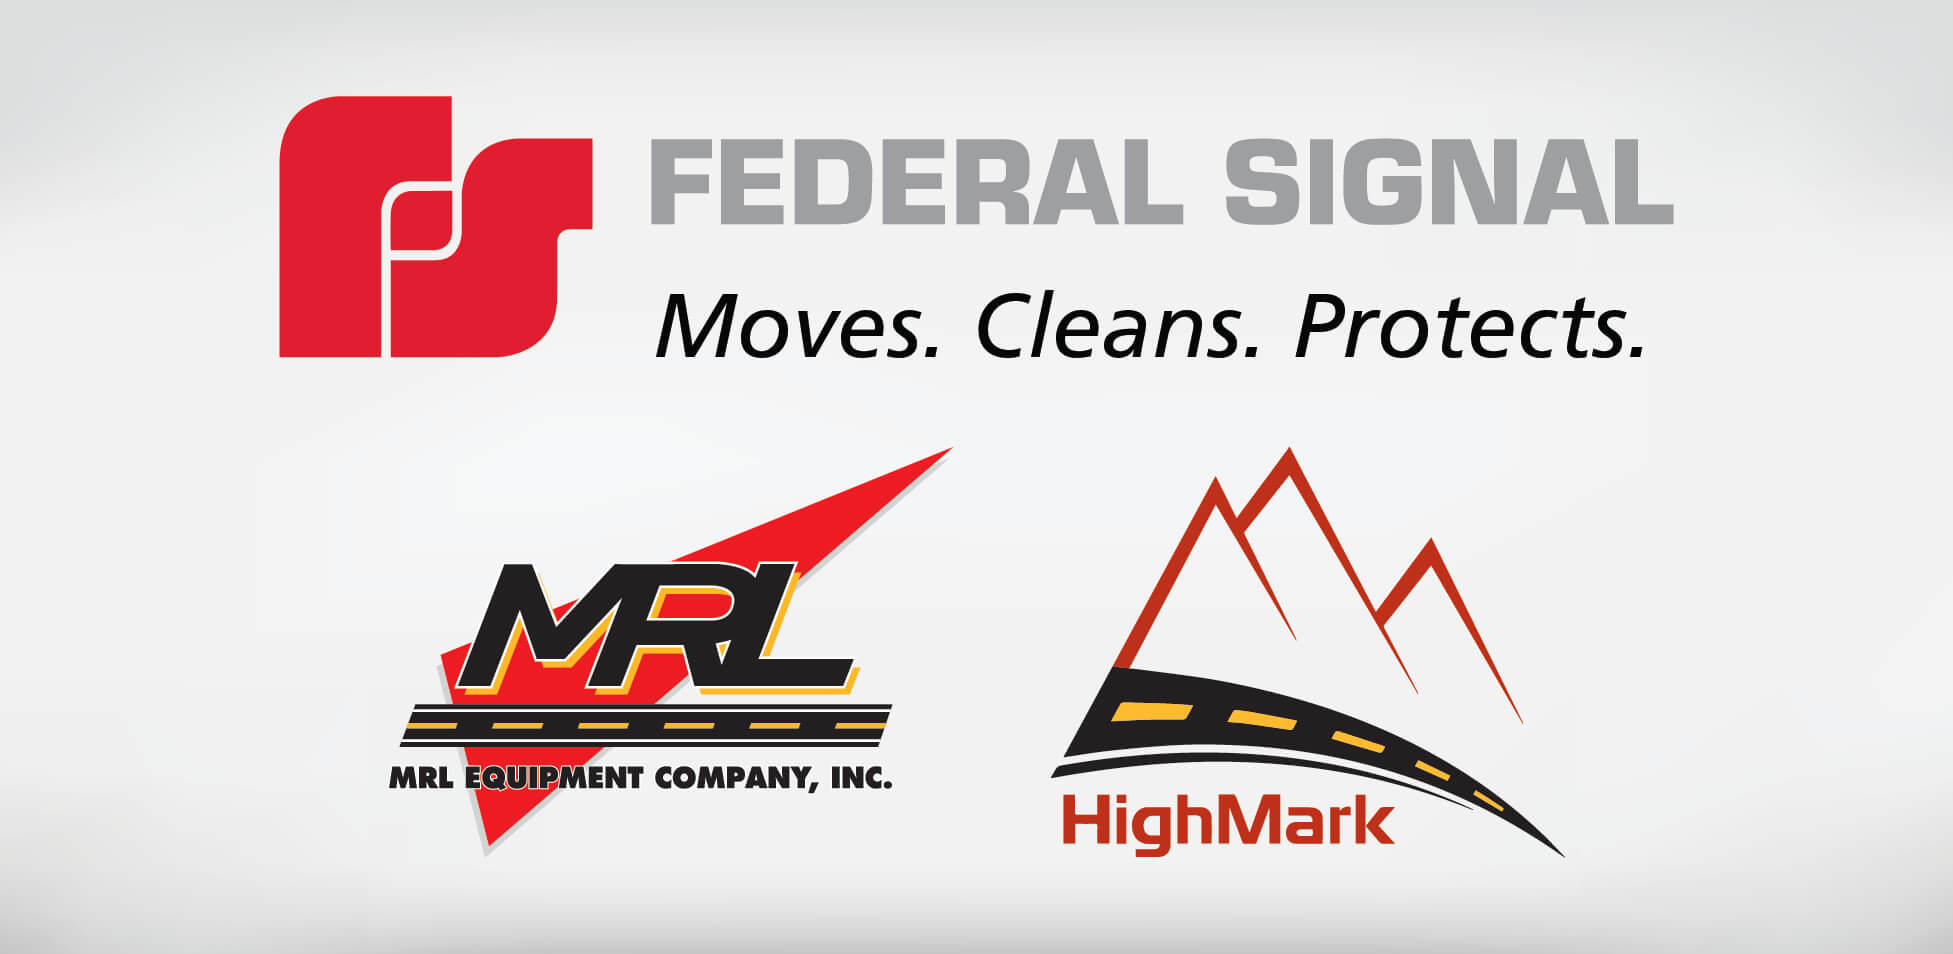 Federal Signal Completes Acquisition of Mark Rite Lines Equipment Company, Inc.